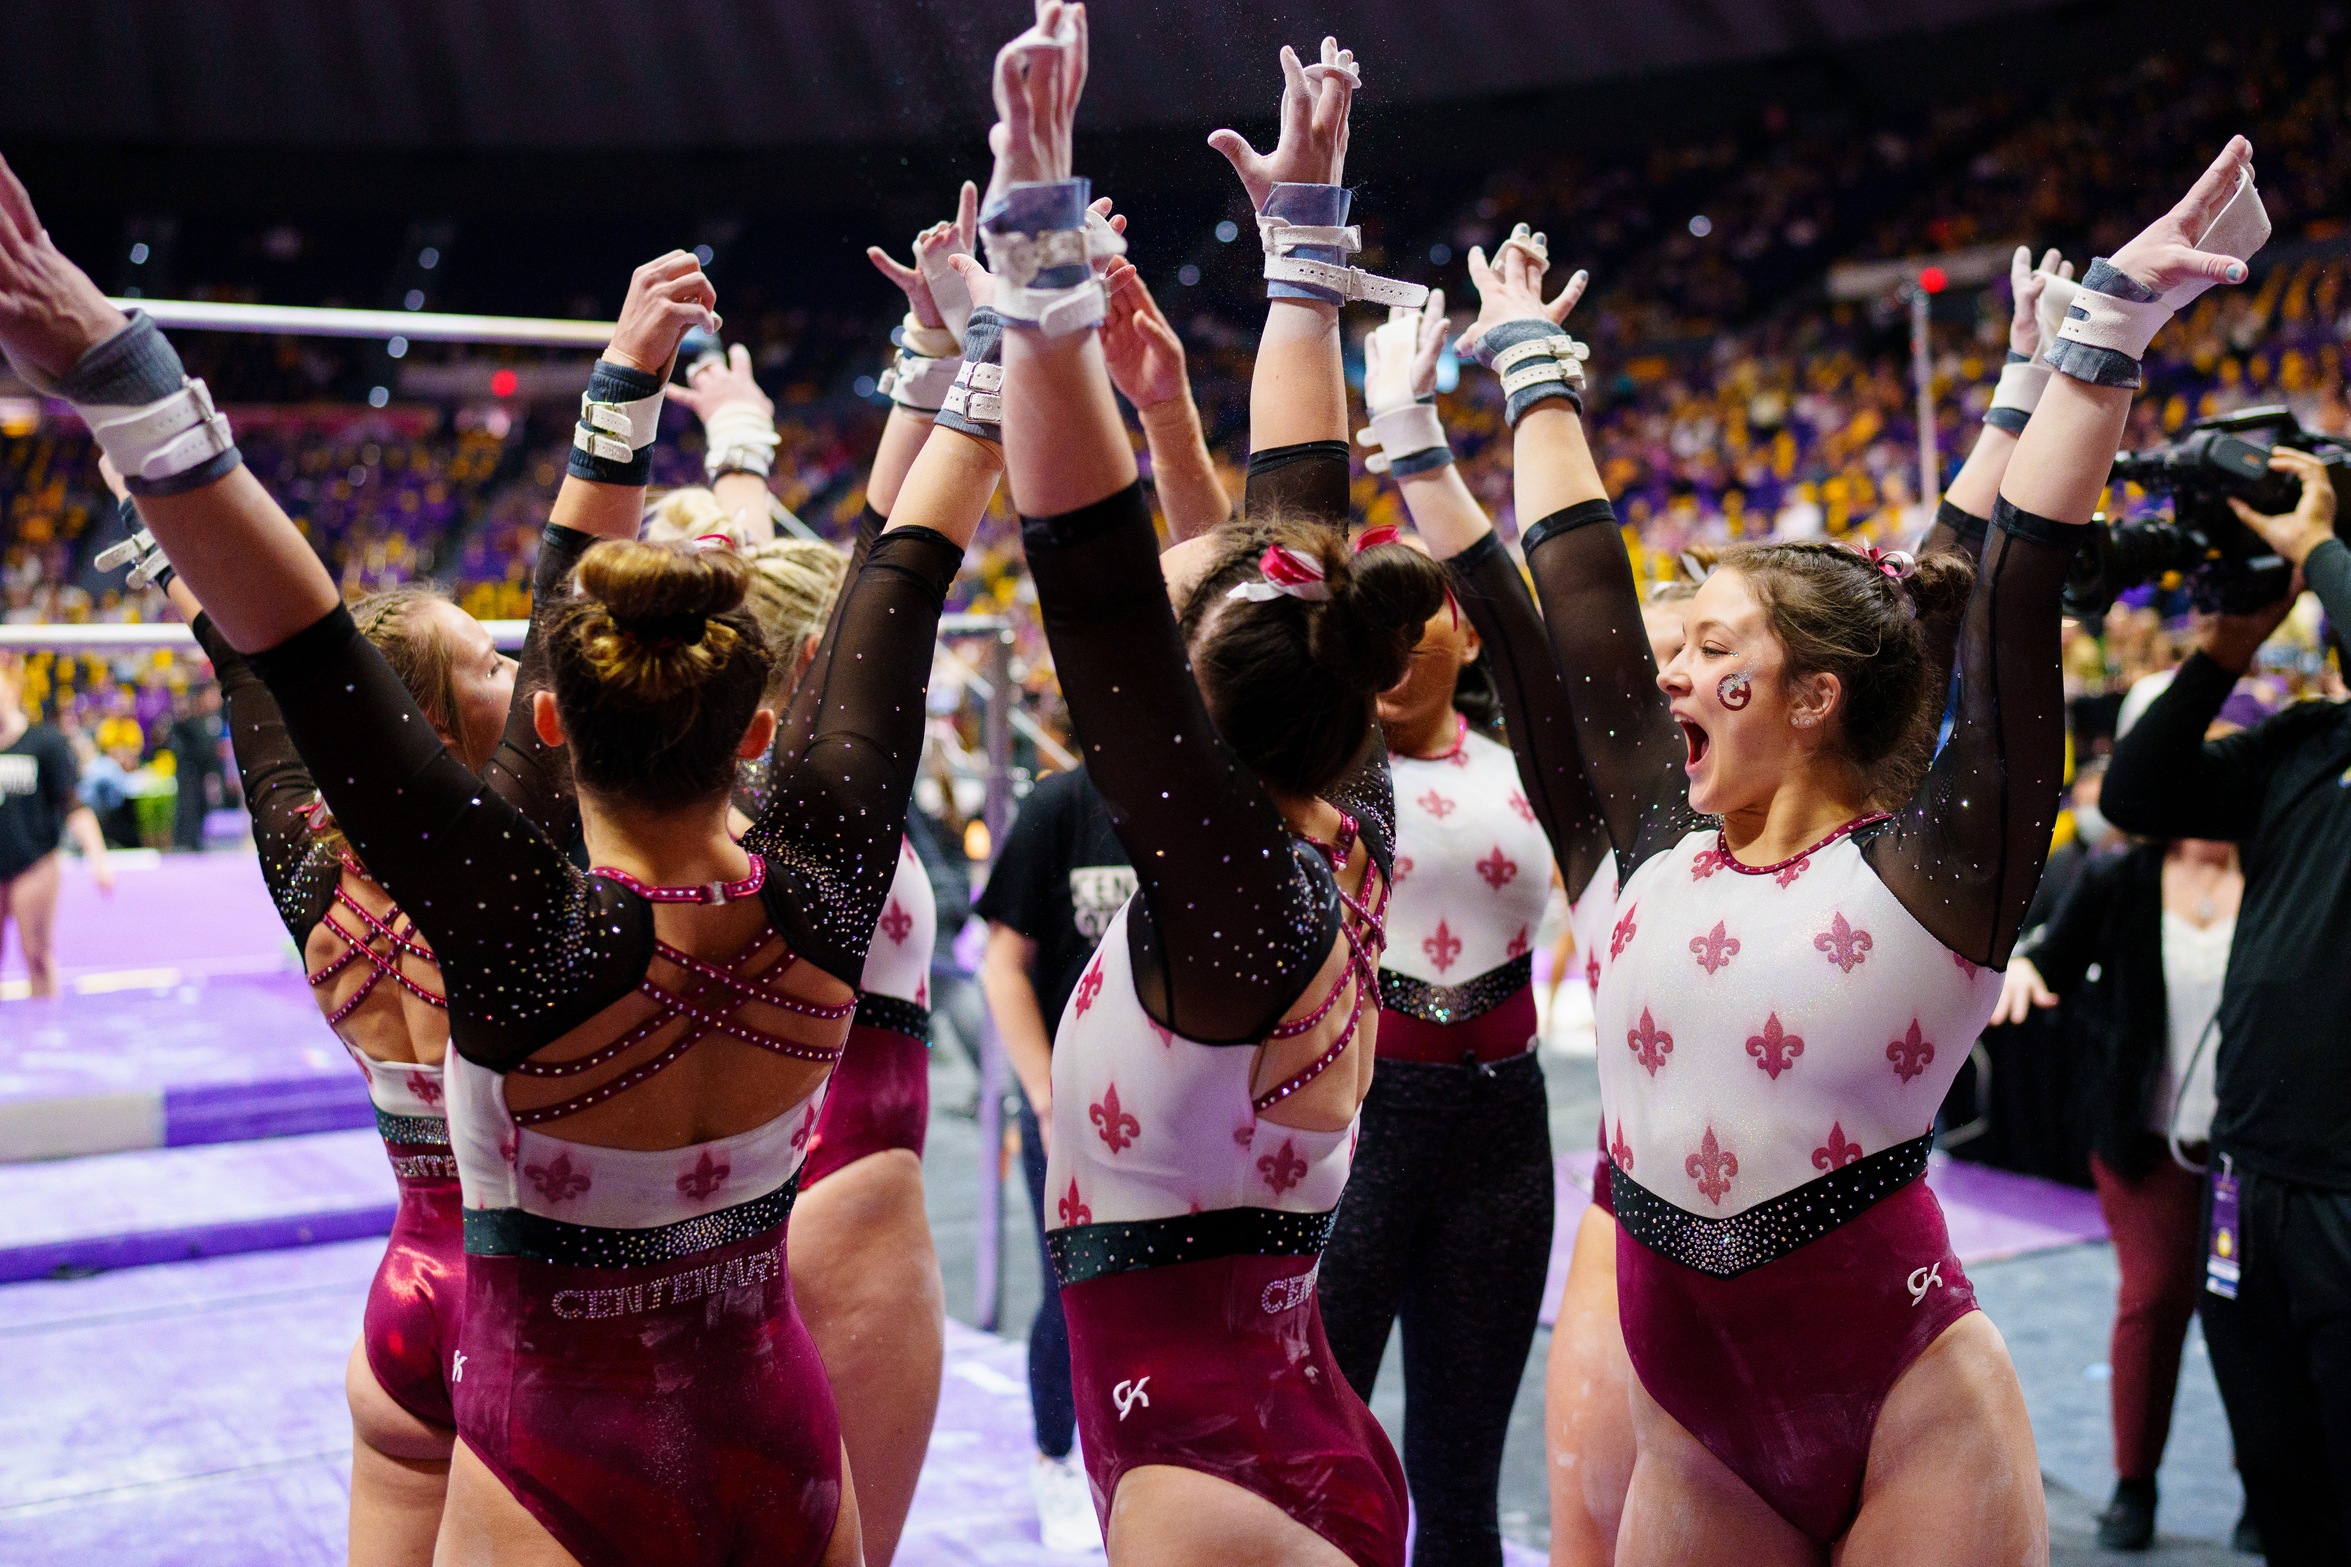 The Ladies earned an impressive 189.535 score on Friday night.